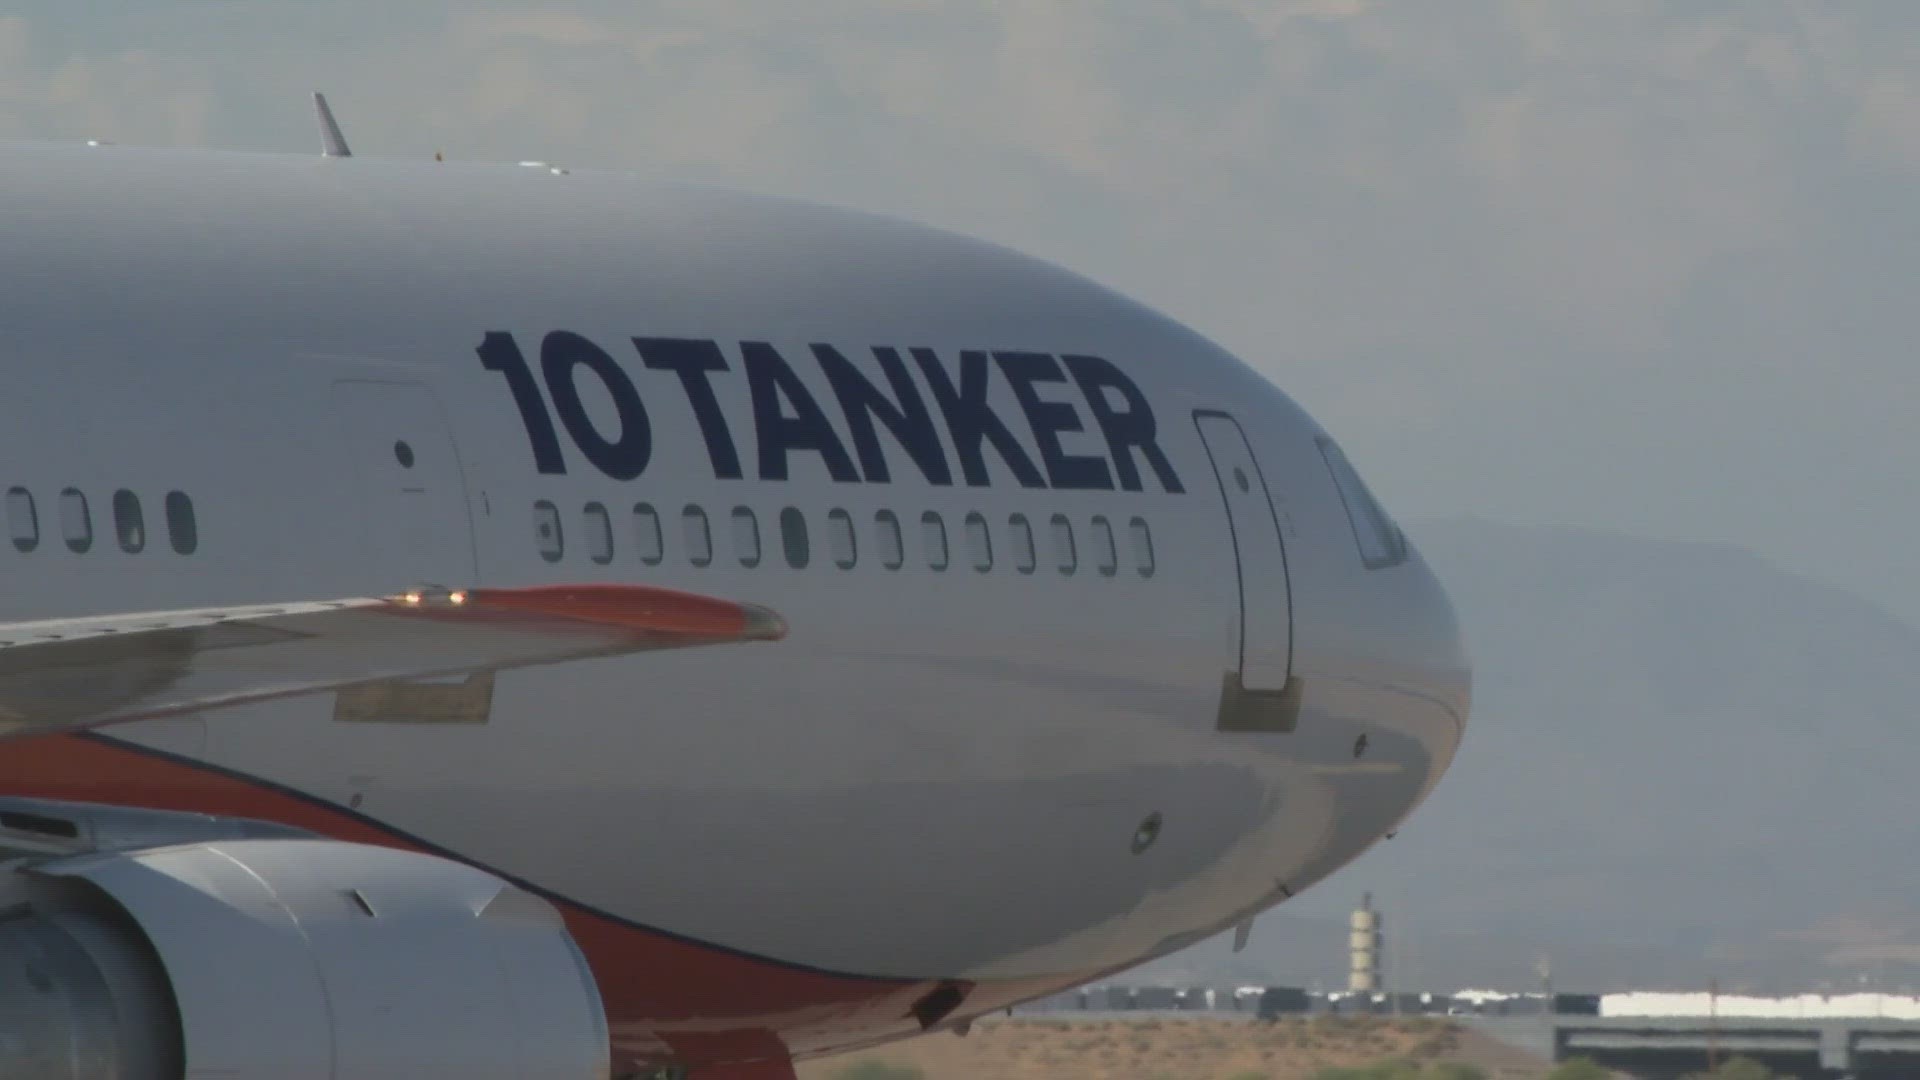 DC-10 tankers, one of four used to not only combat wildfires here in Arizona but across the world.